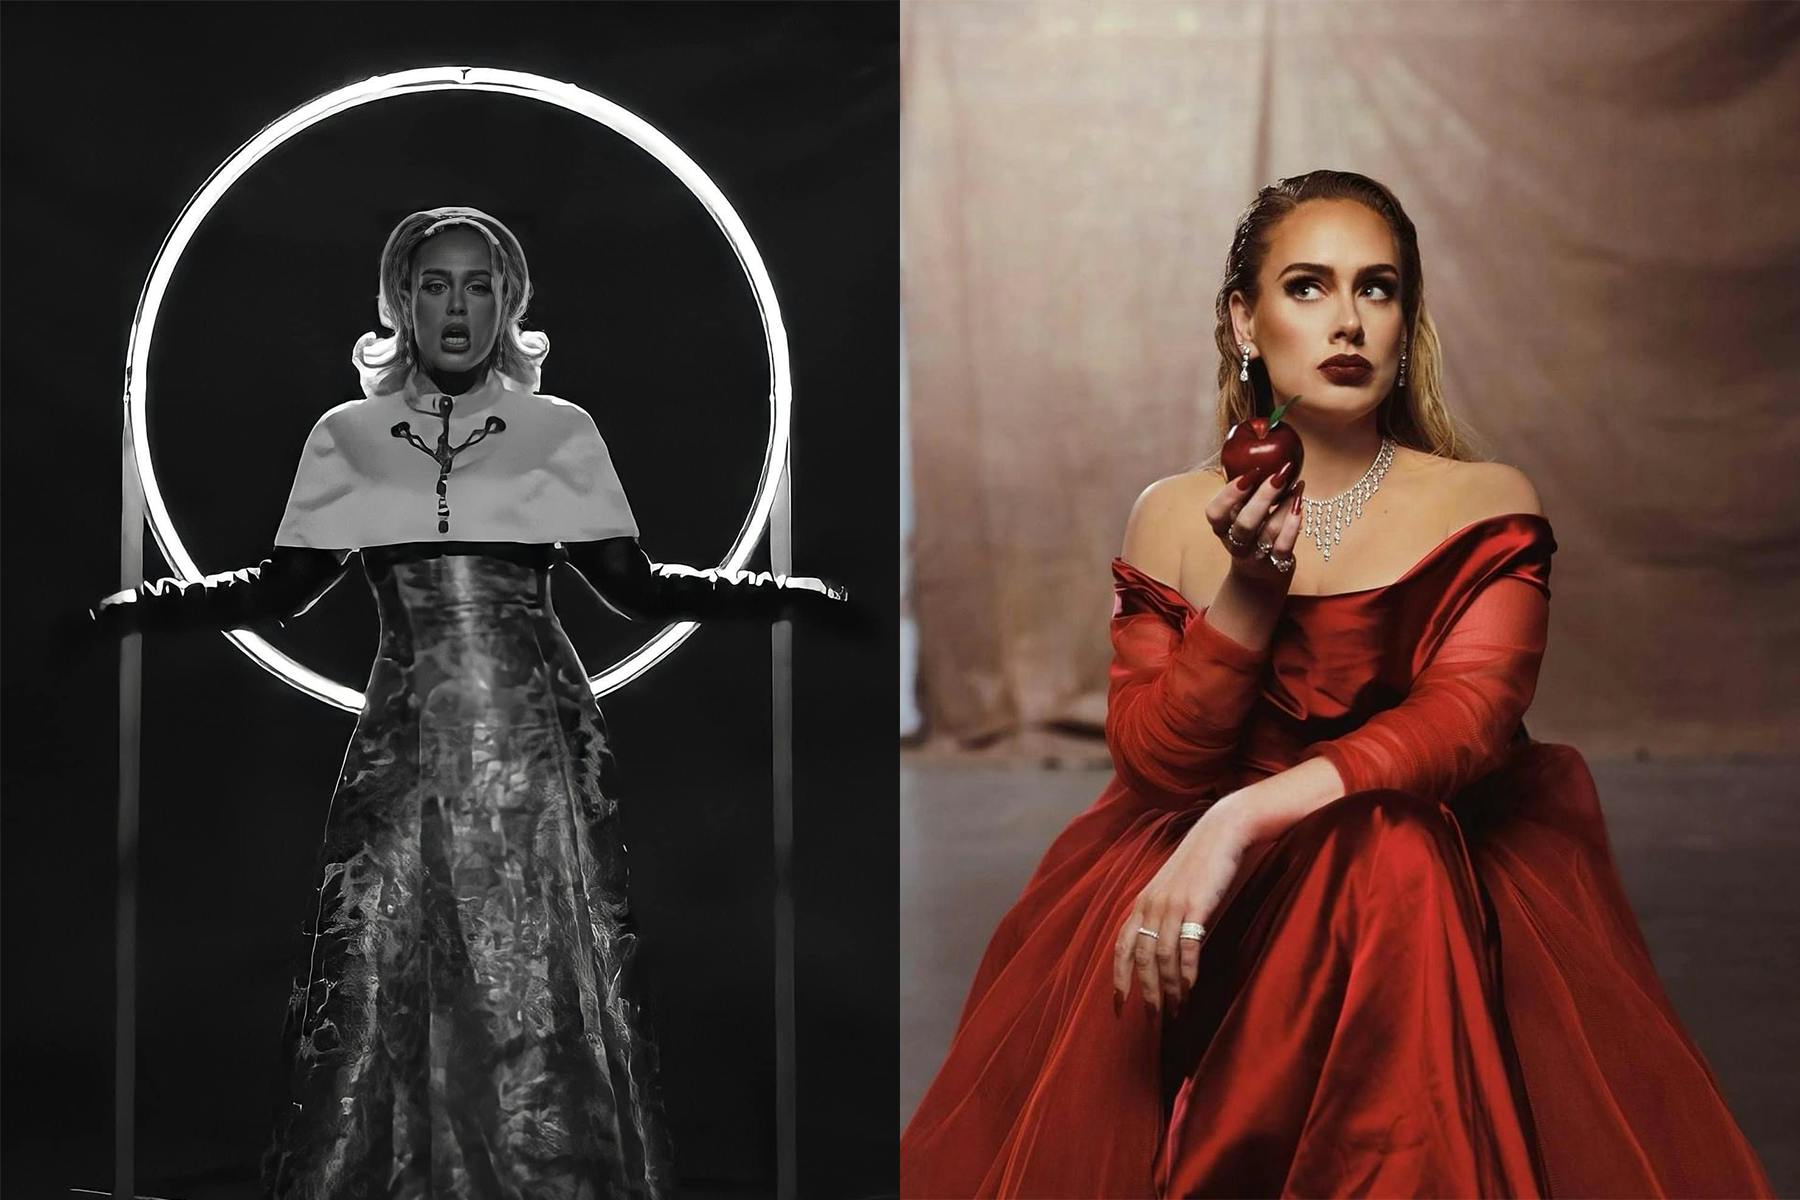 Adele glowed in a custom Louis Vuitton burgundy velvet gown while